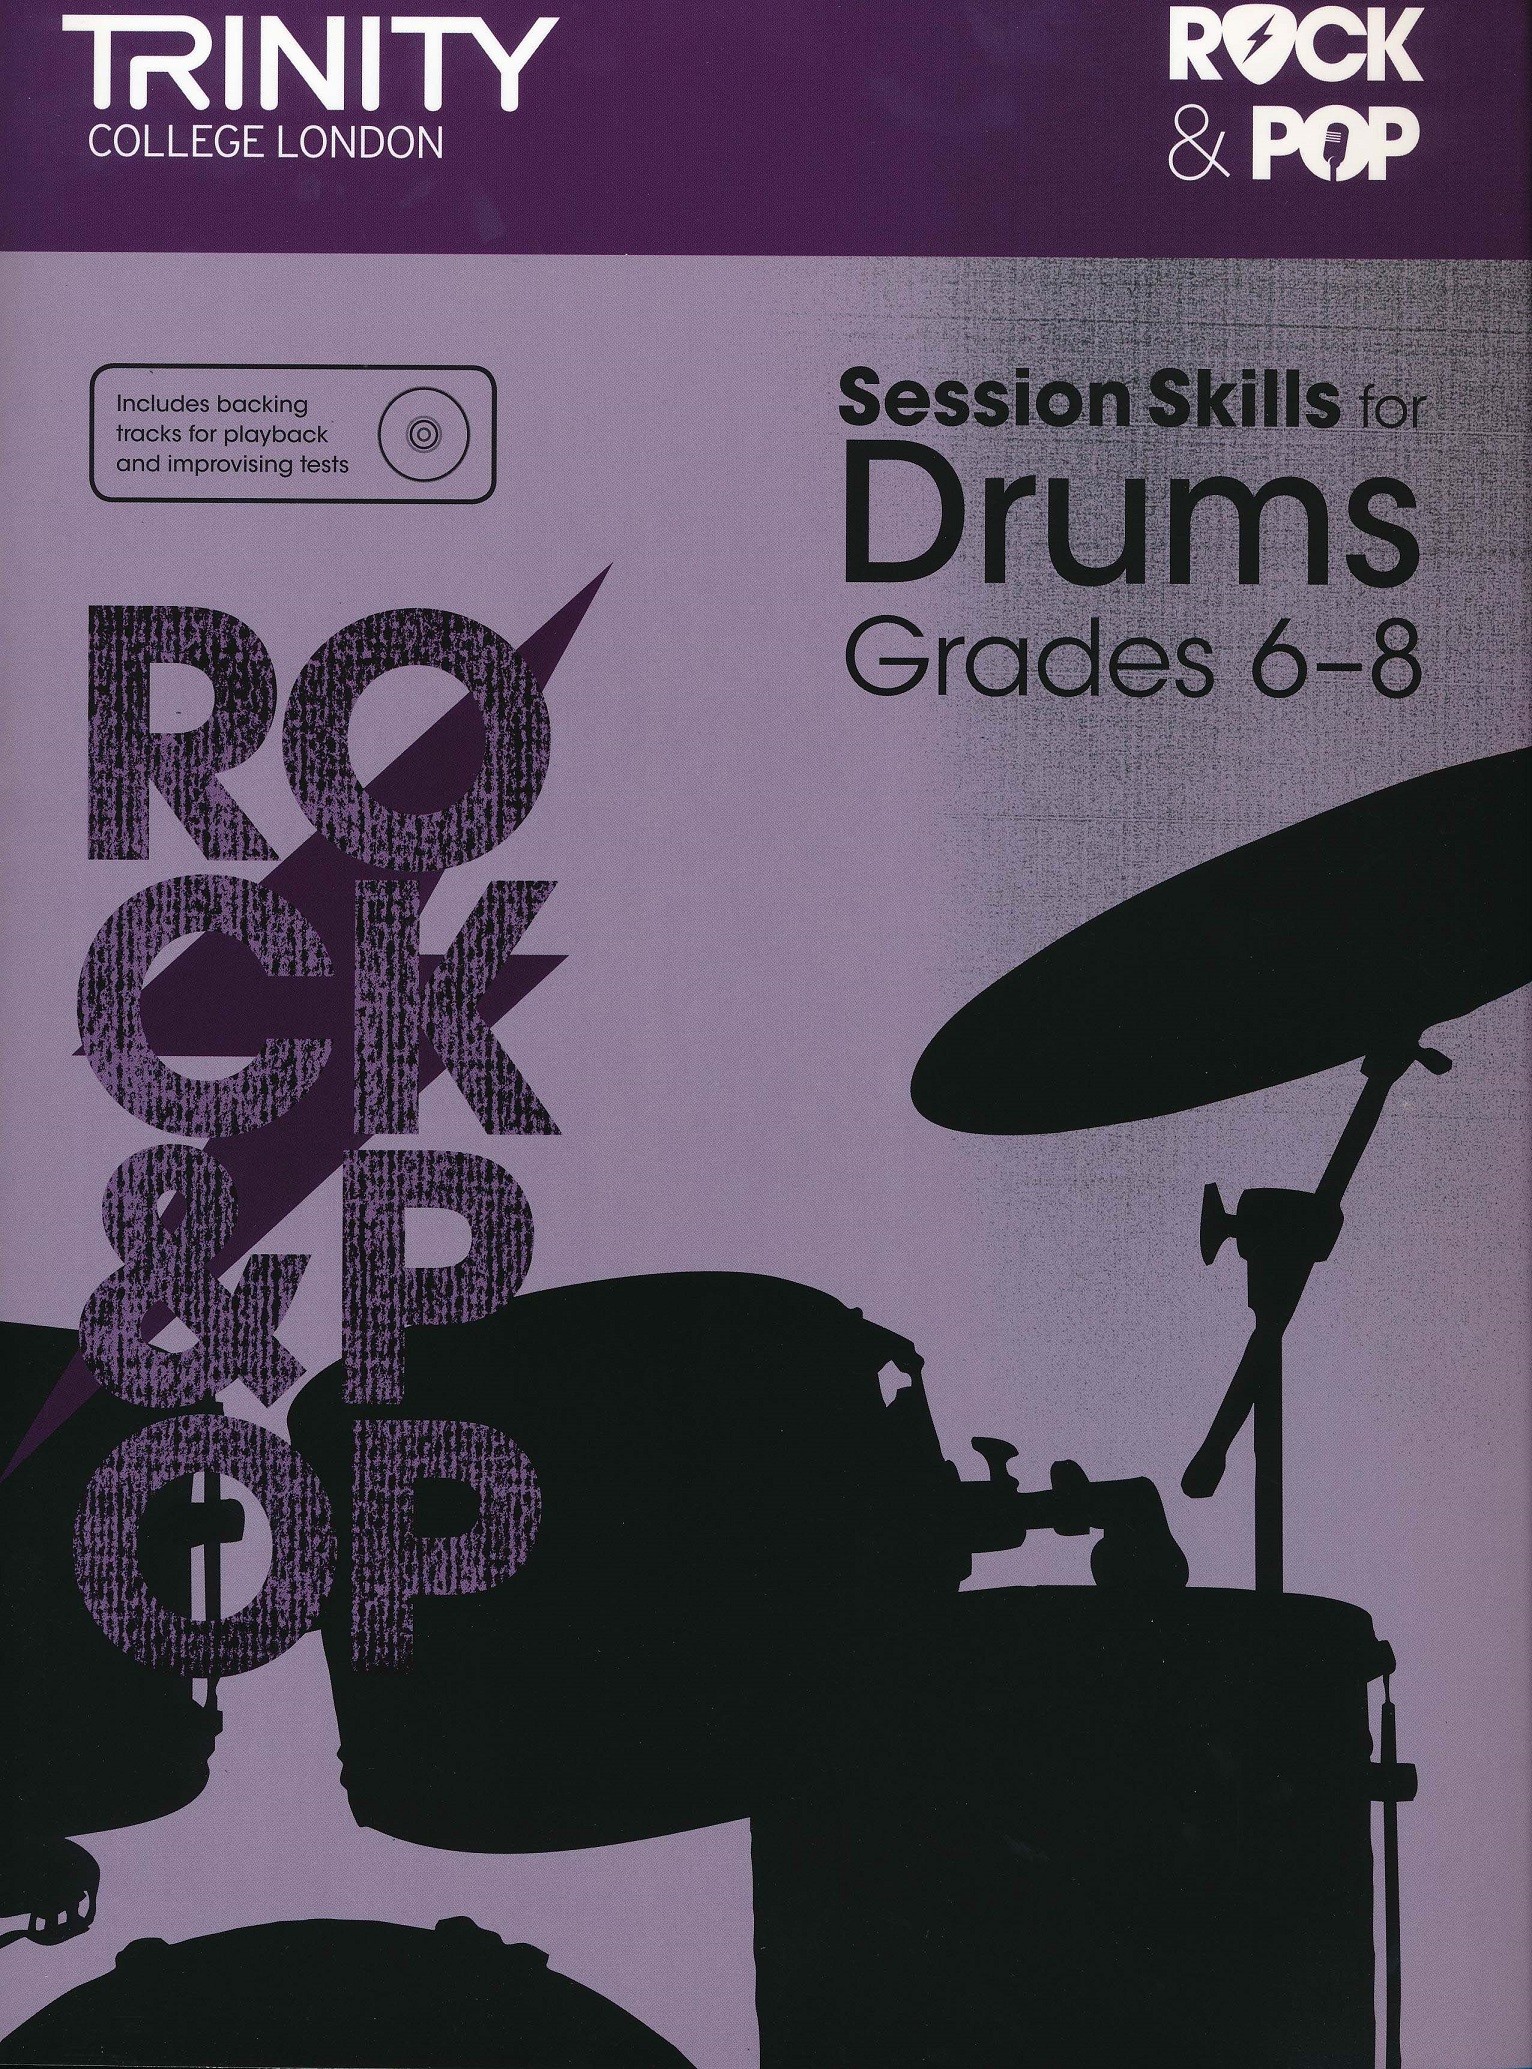 Rock and Pop Session Skills for Drums: Grades 6-8